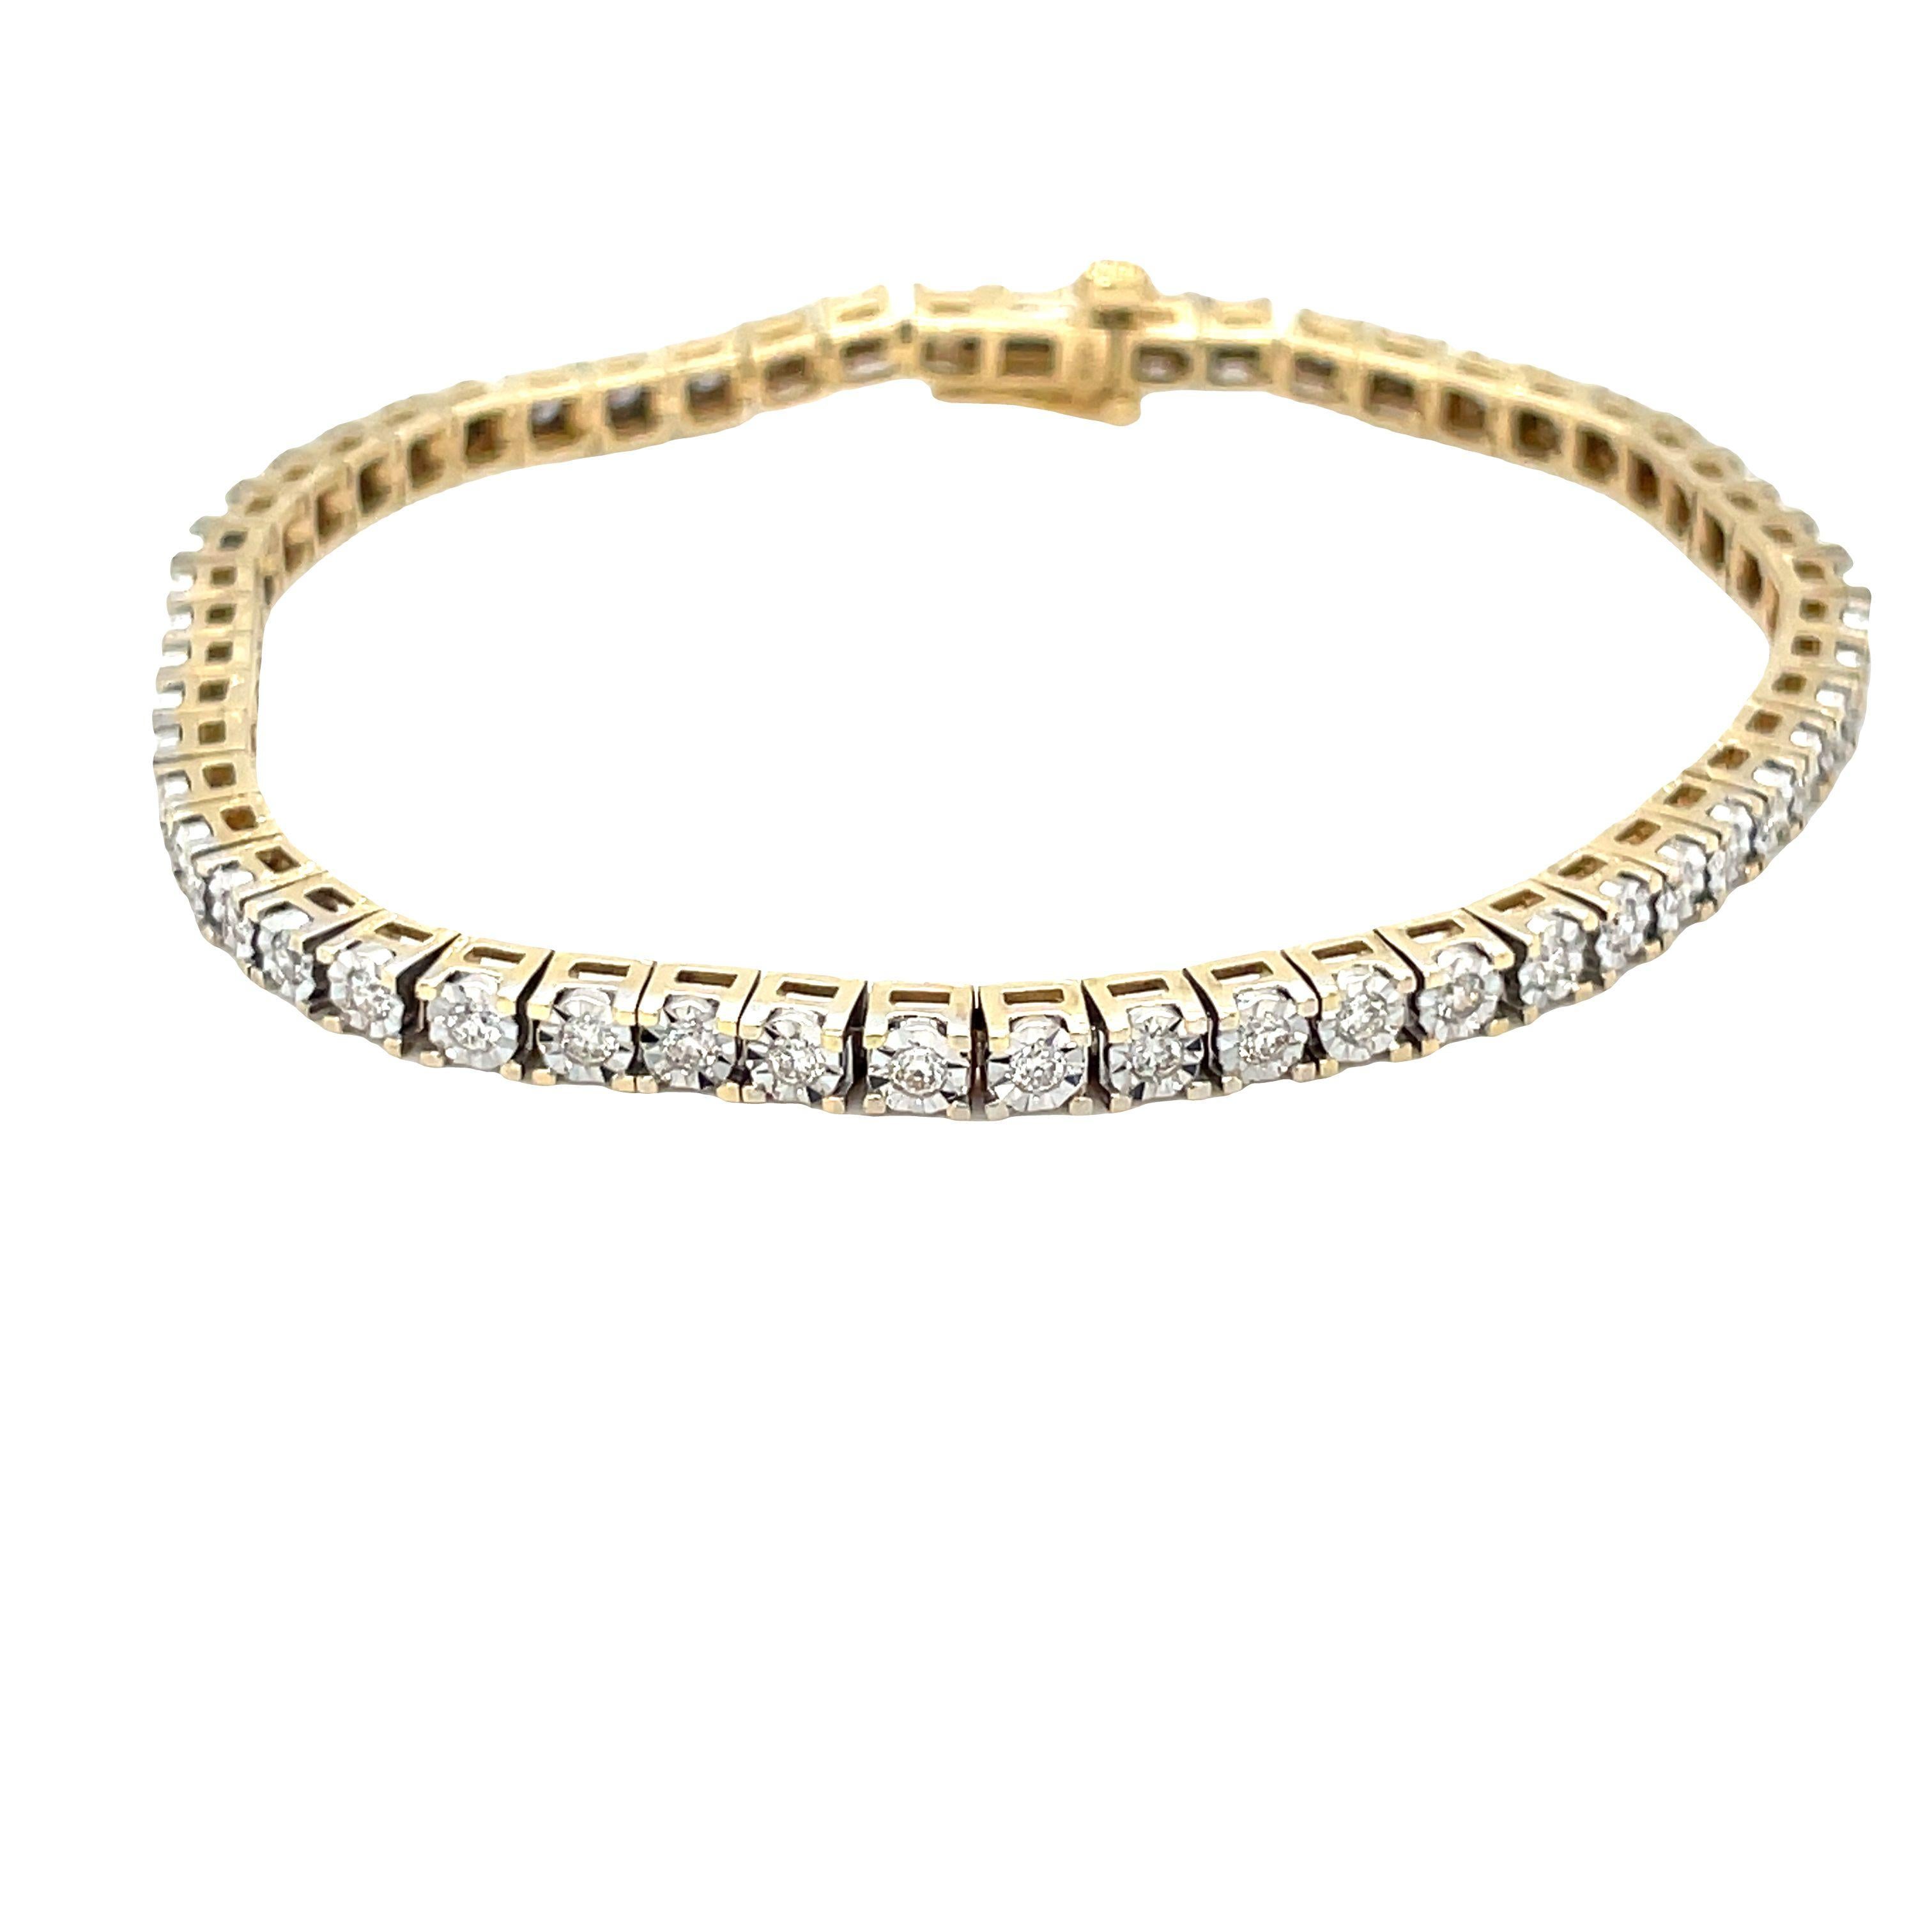 Elevate your everyday style with this enchanting Diamond Tennis Bracelet! Made from elegant 10 karat yellow gold, it features 1.90 carats of round cut diamonds with G to H color and SI2 clarity. The 54 diamonds and unique illusion setting enhance